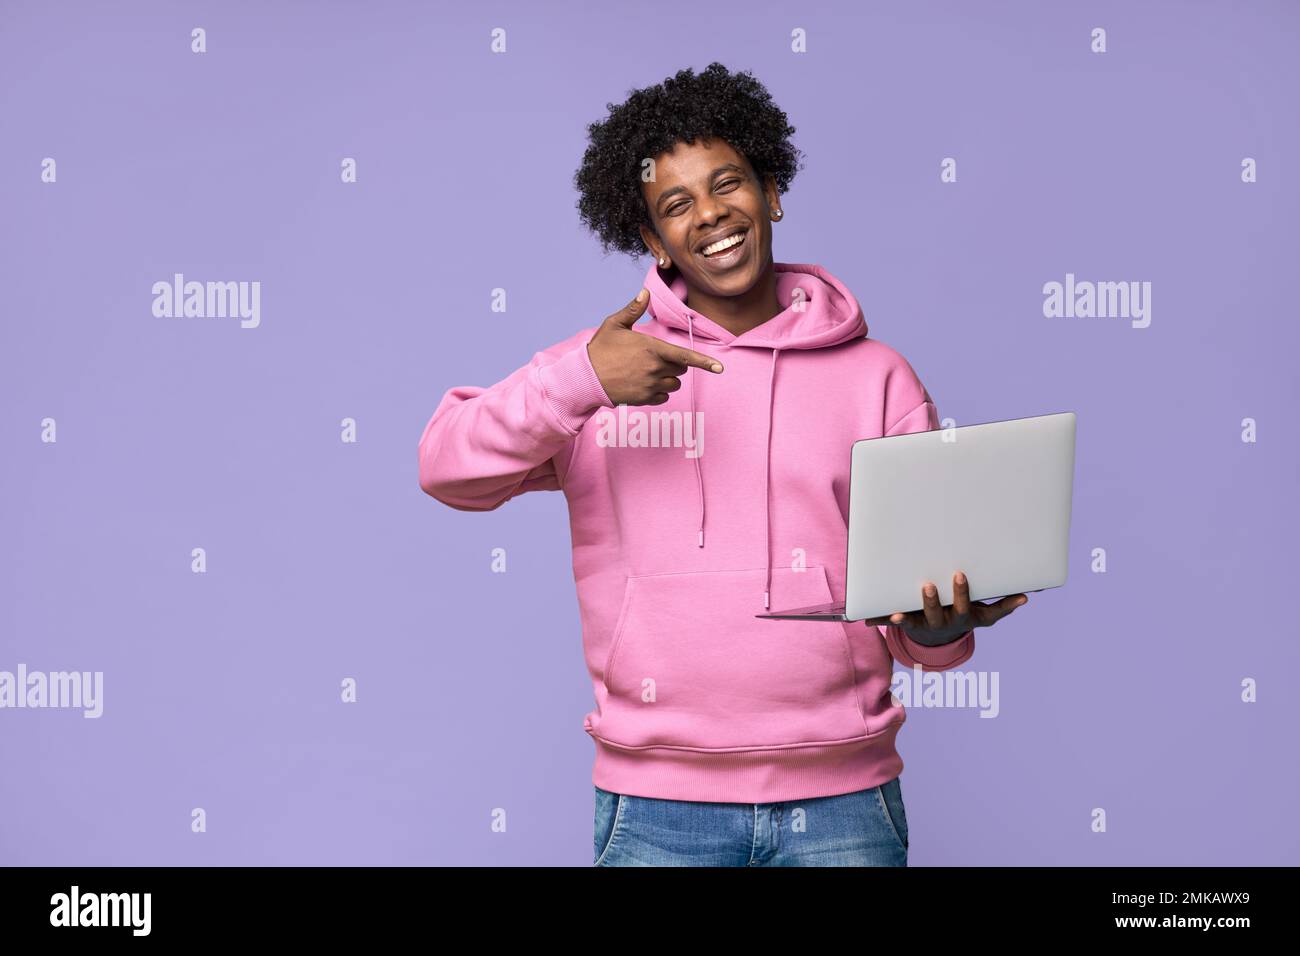 Happy African teen student holding pointing at laptop isolated on purple. Stock Photo